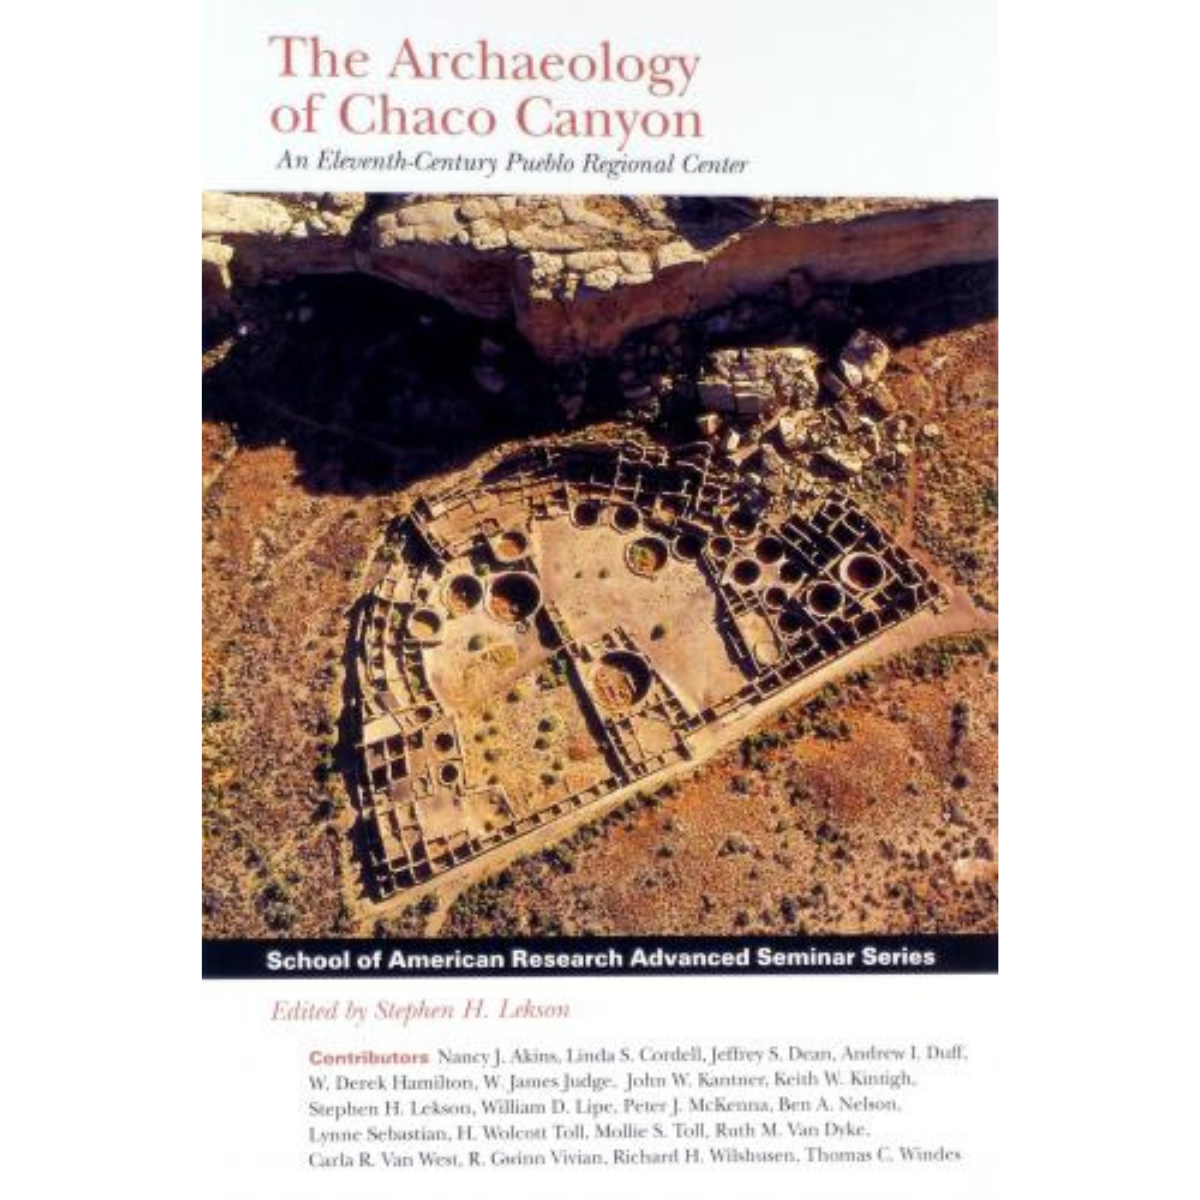 The Archaeology of Chaco Canyon